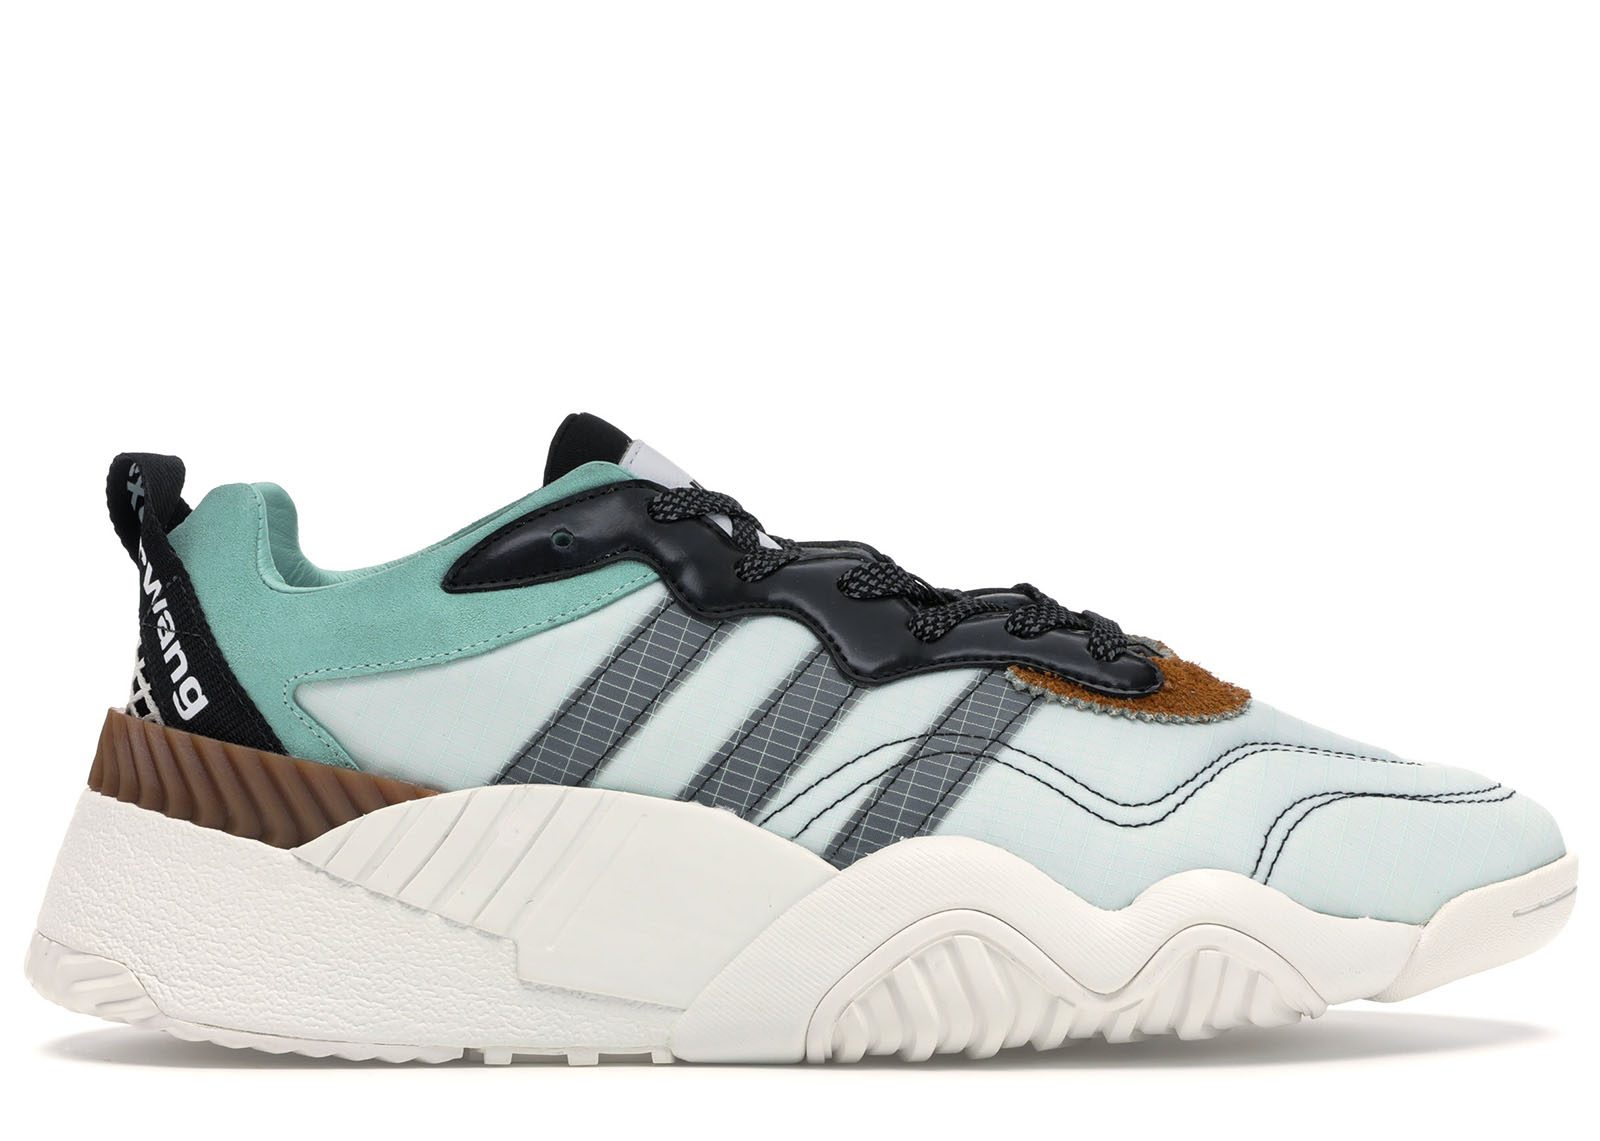 adidas AW Turnout Trainer Alexander Wang Clear Mint Core Black